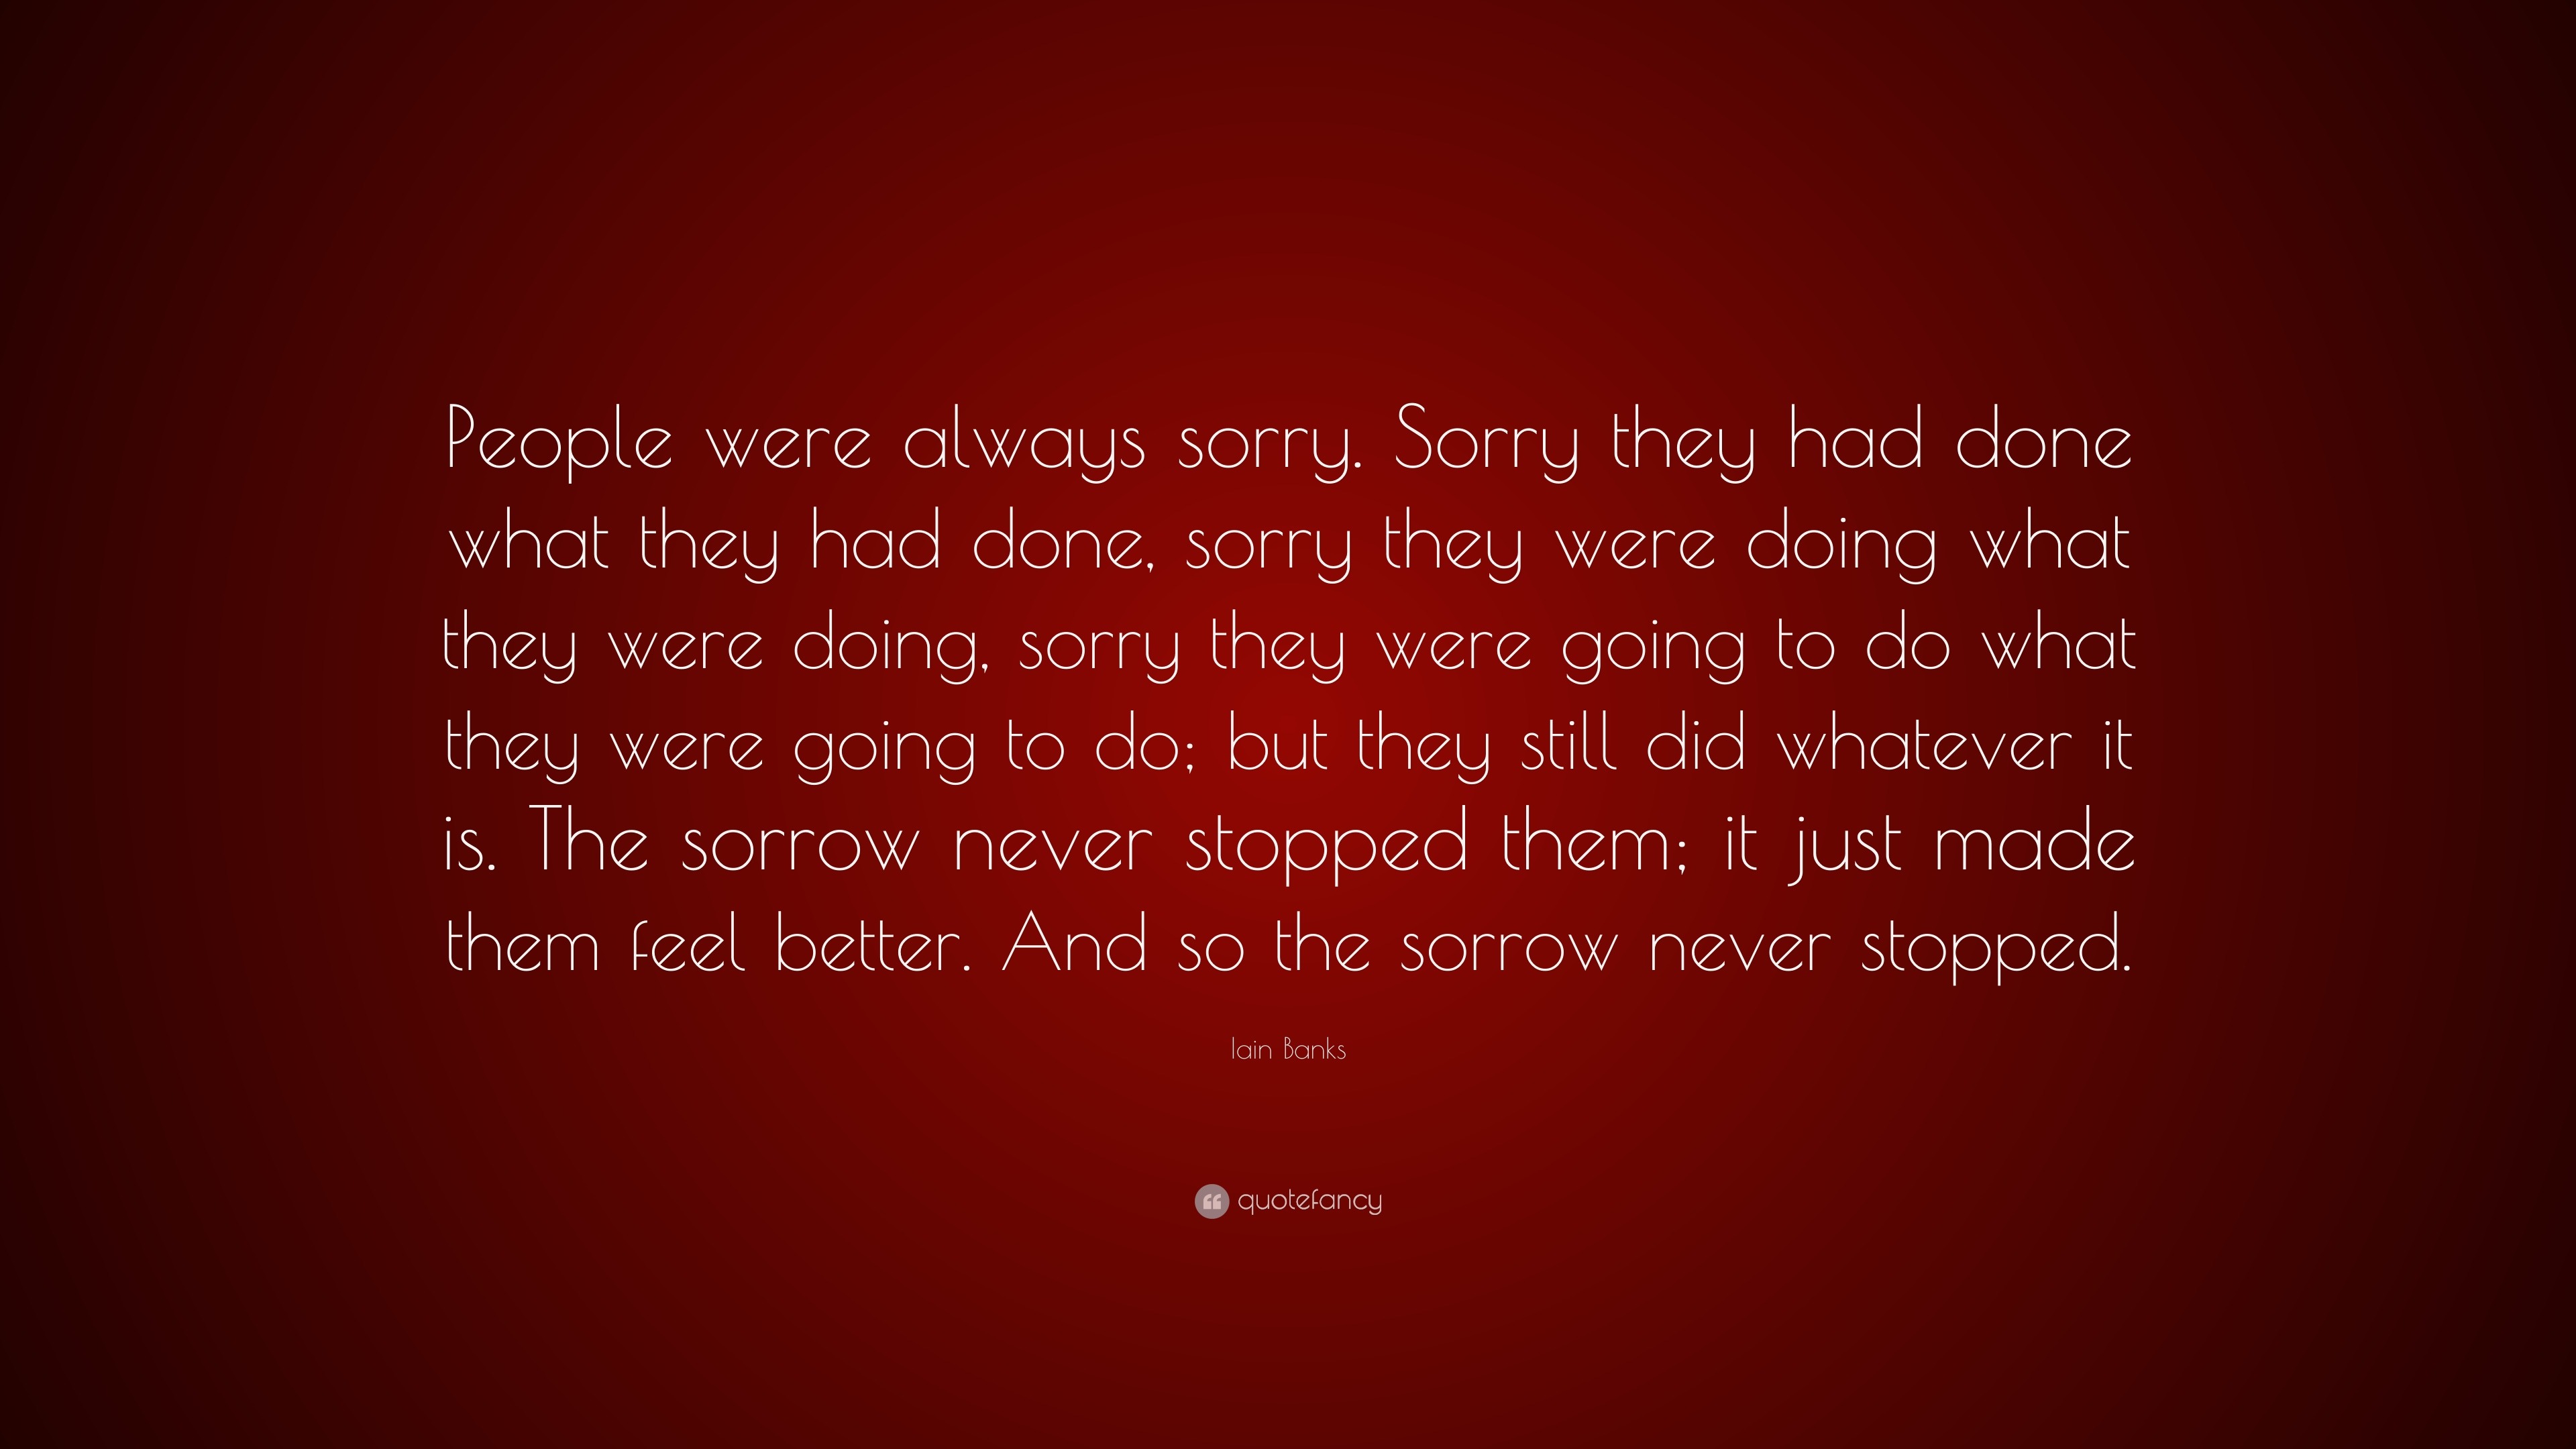 https://quotefancy.com/media/wallpaper/3840x2160/842391-Iain-Banks-Quote-People-were-always-sorry-Sorry-they-had-done-what.jpg